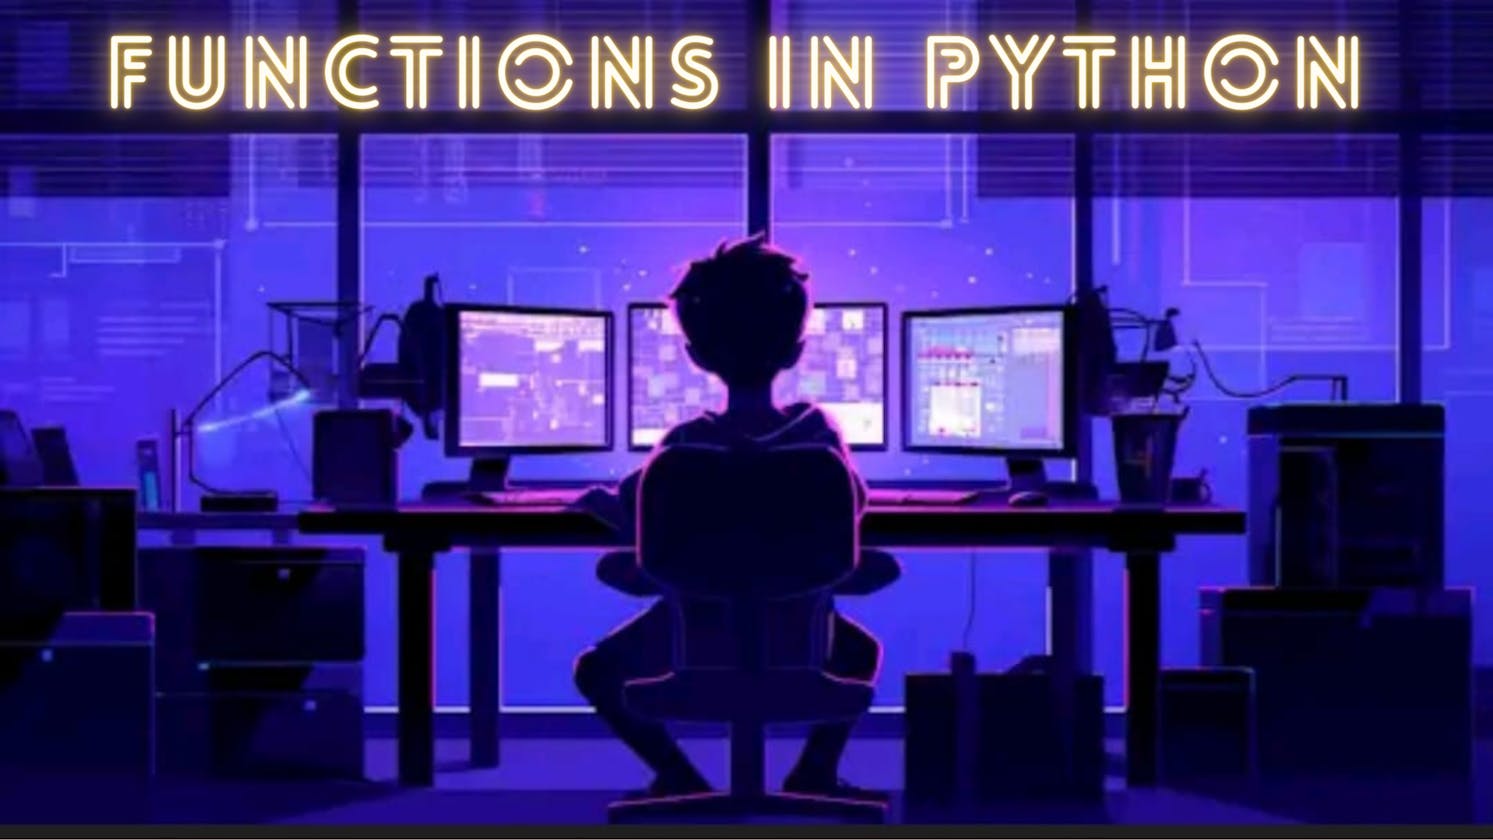 Functions in python